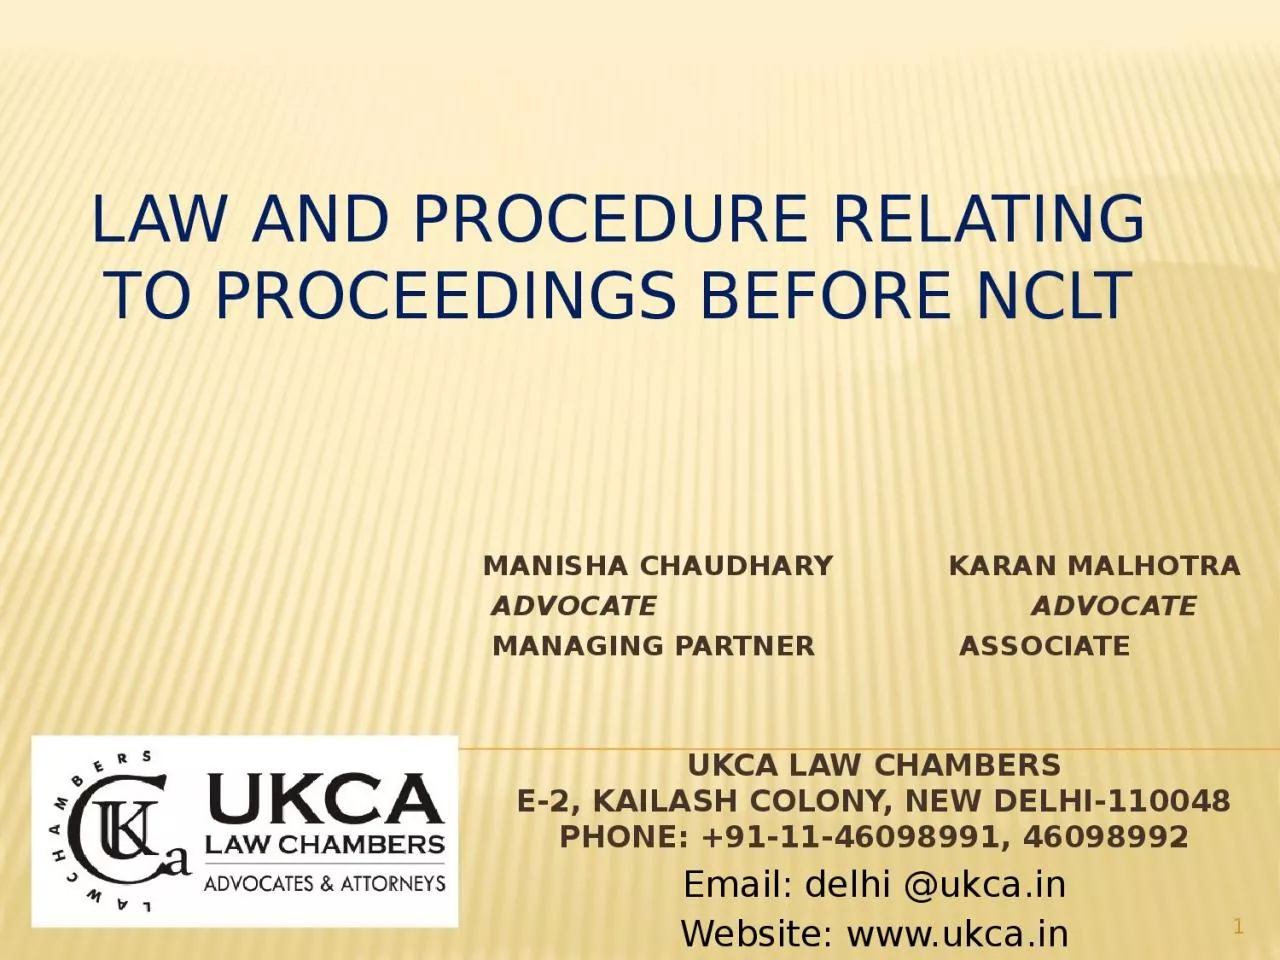 Law and procedure relating to proceedings before